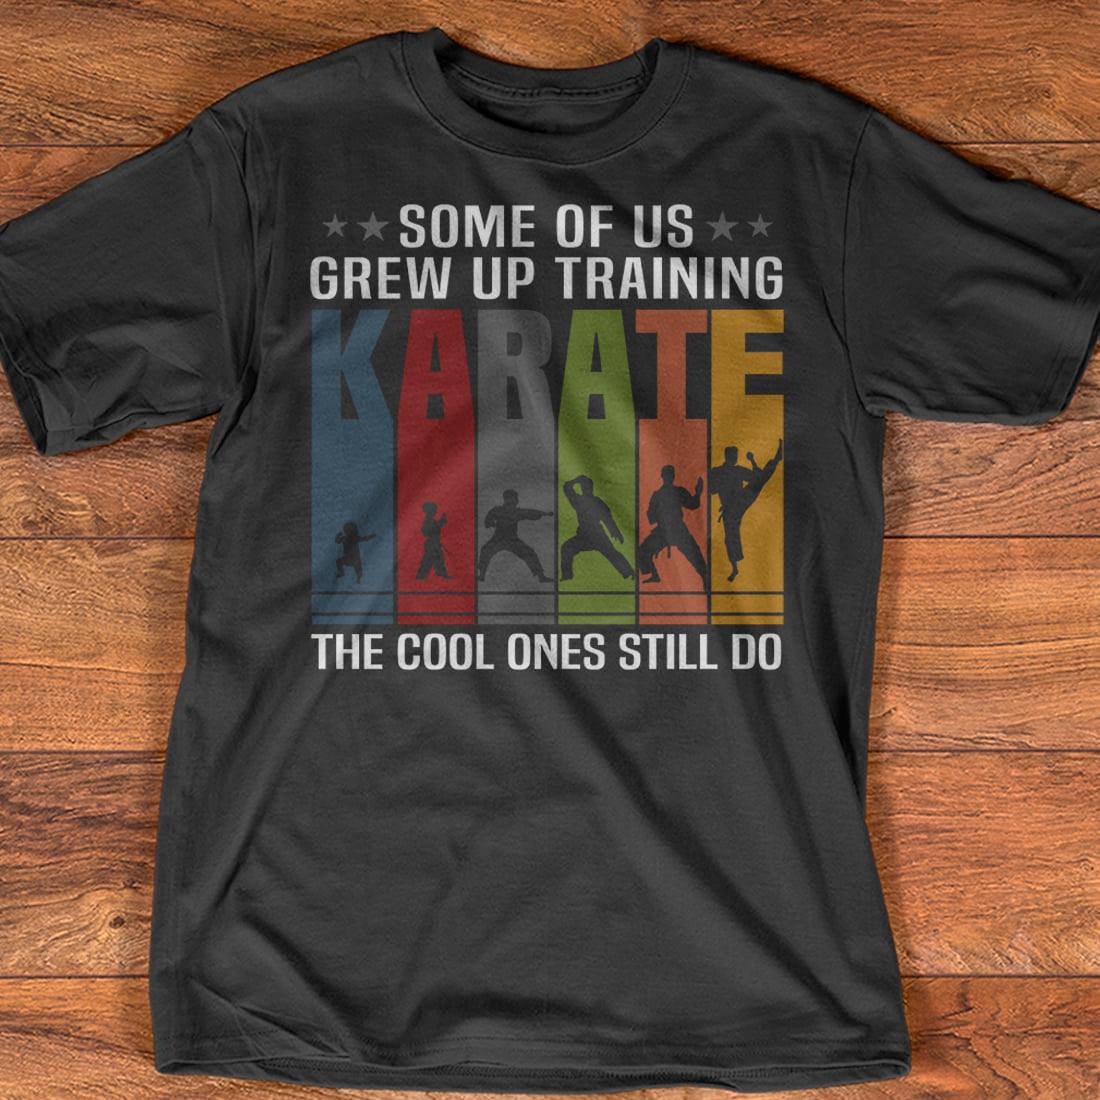 Karate Lover – Some of us grew up training the cool ones still do